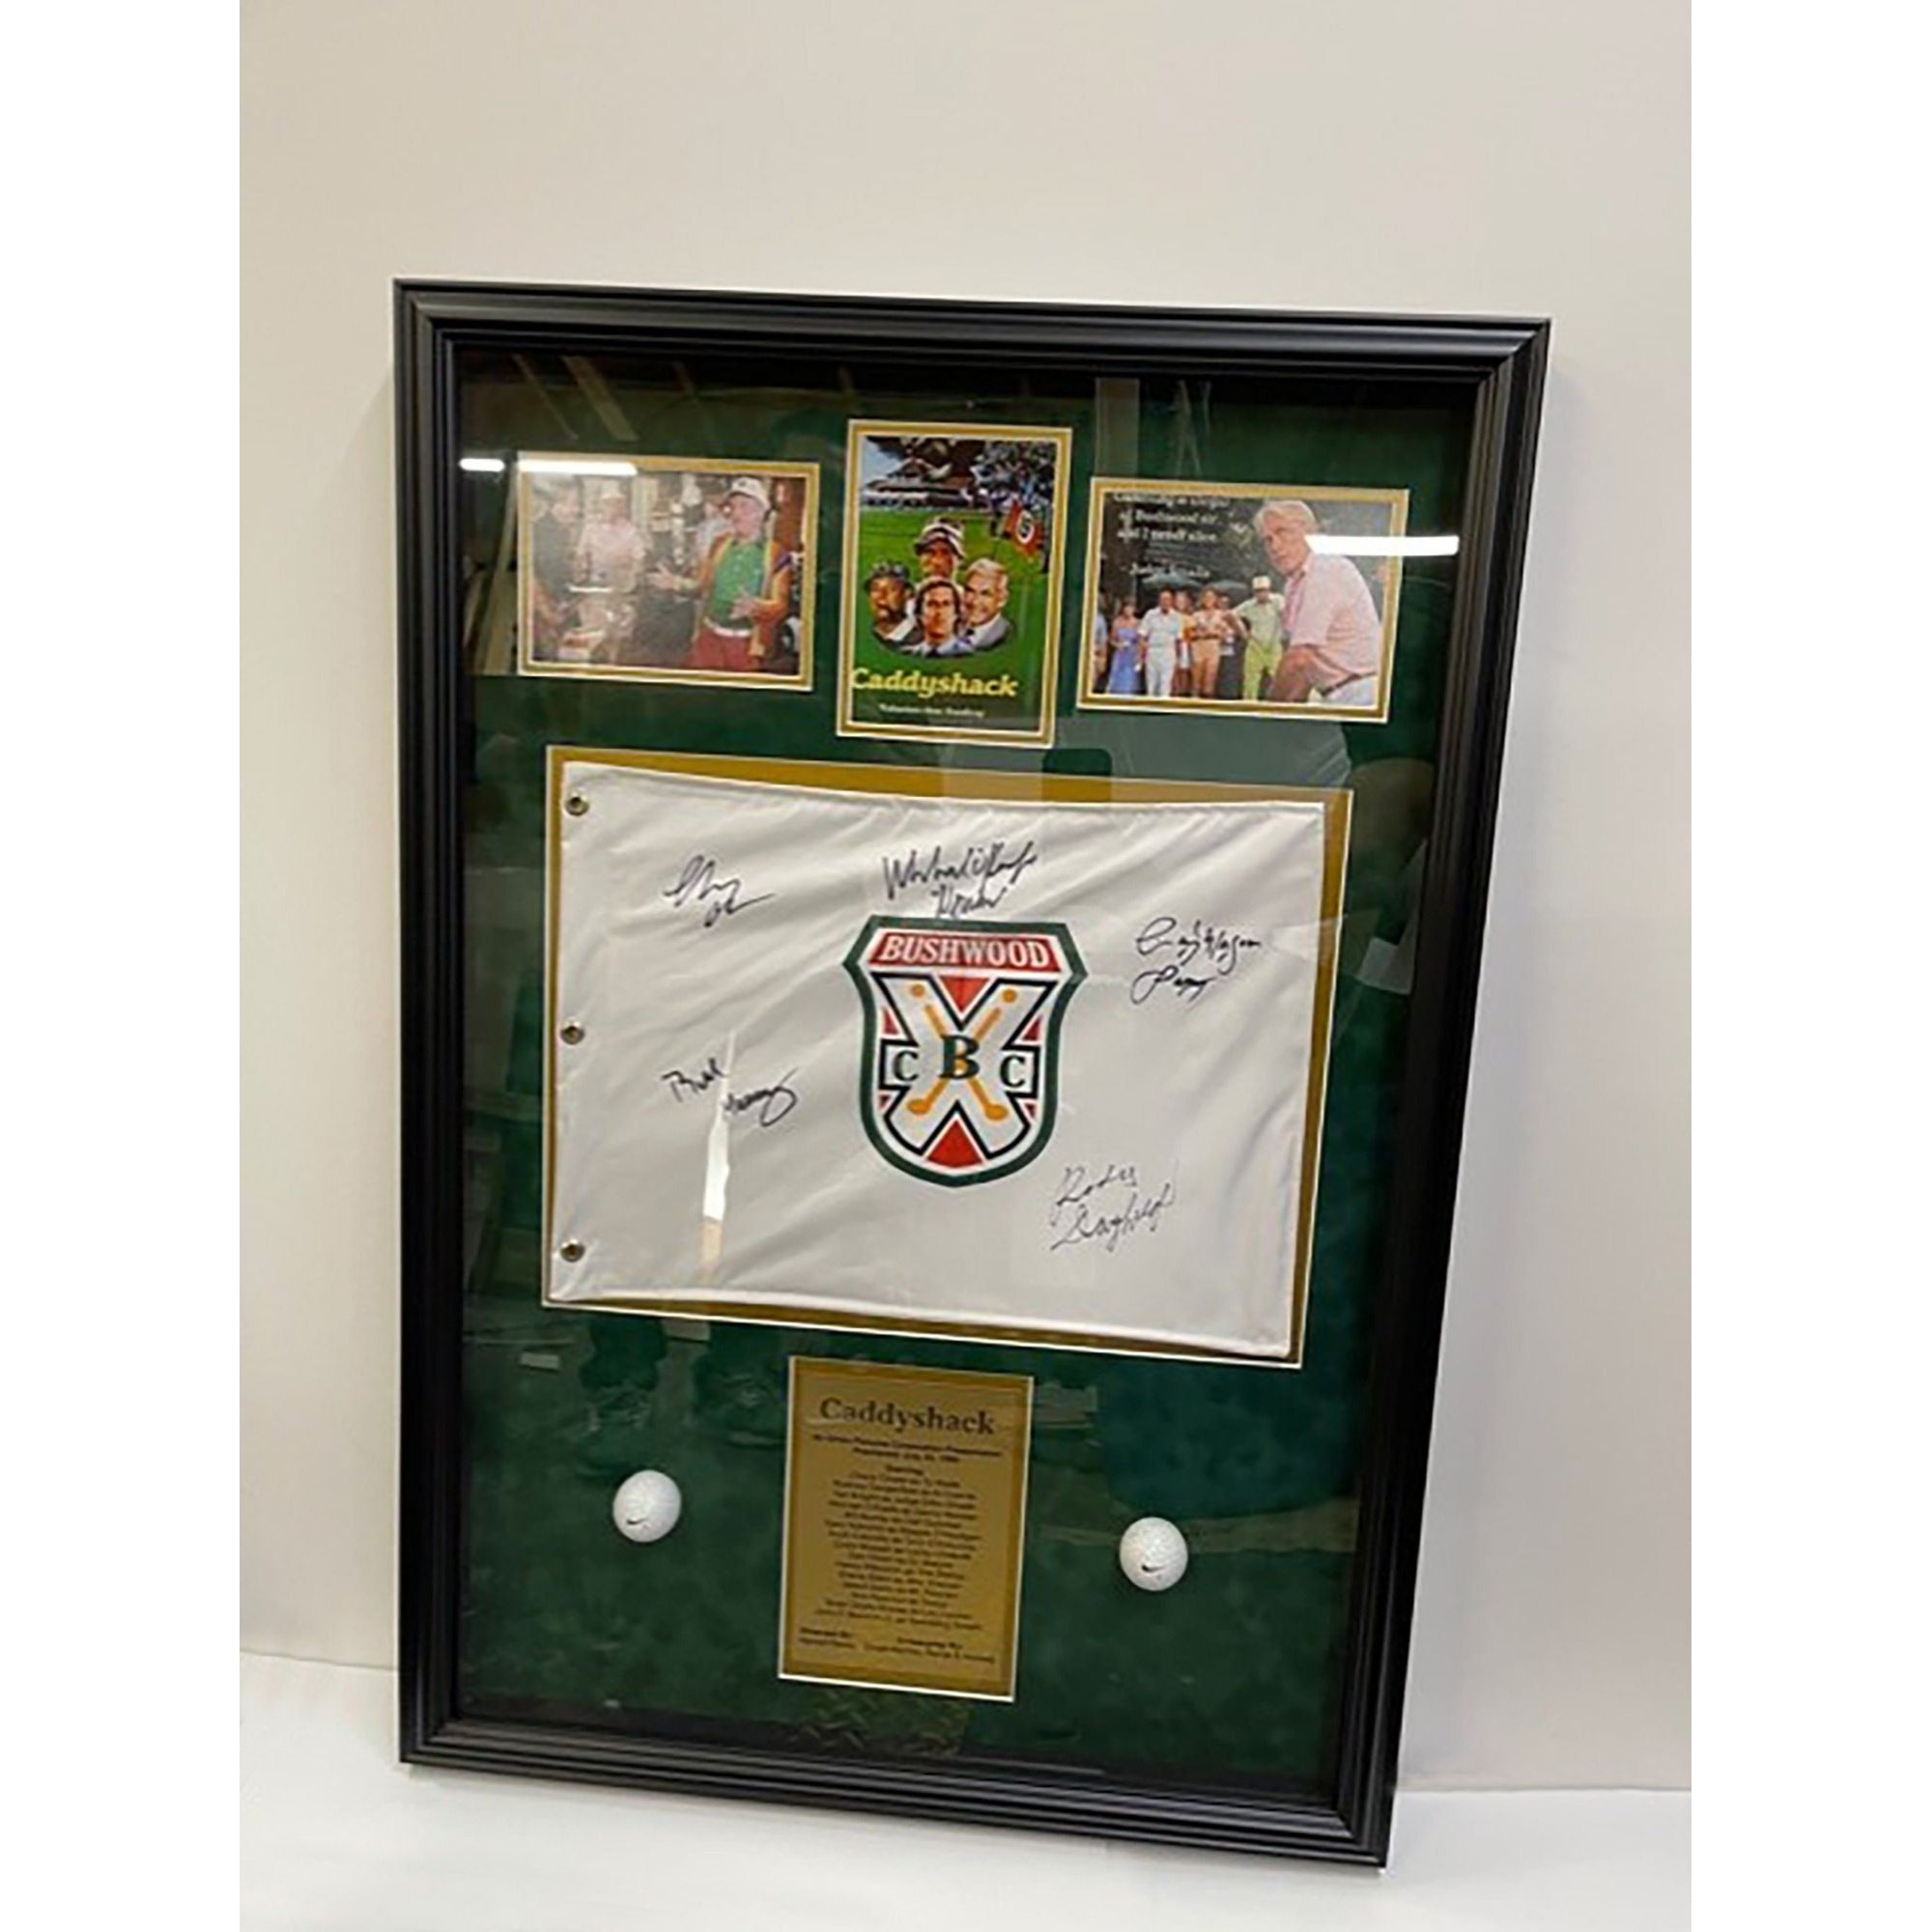 Chevy Chase, Bill Murray, Rodney Dangerfield Caddy Shack signed and framed with proof